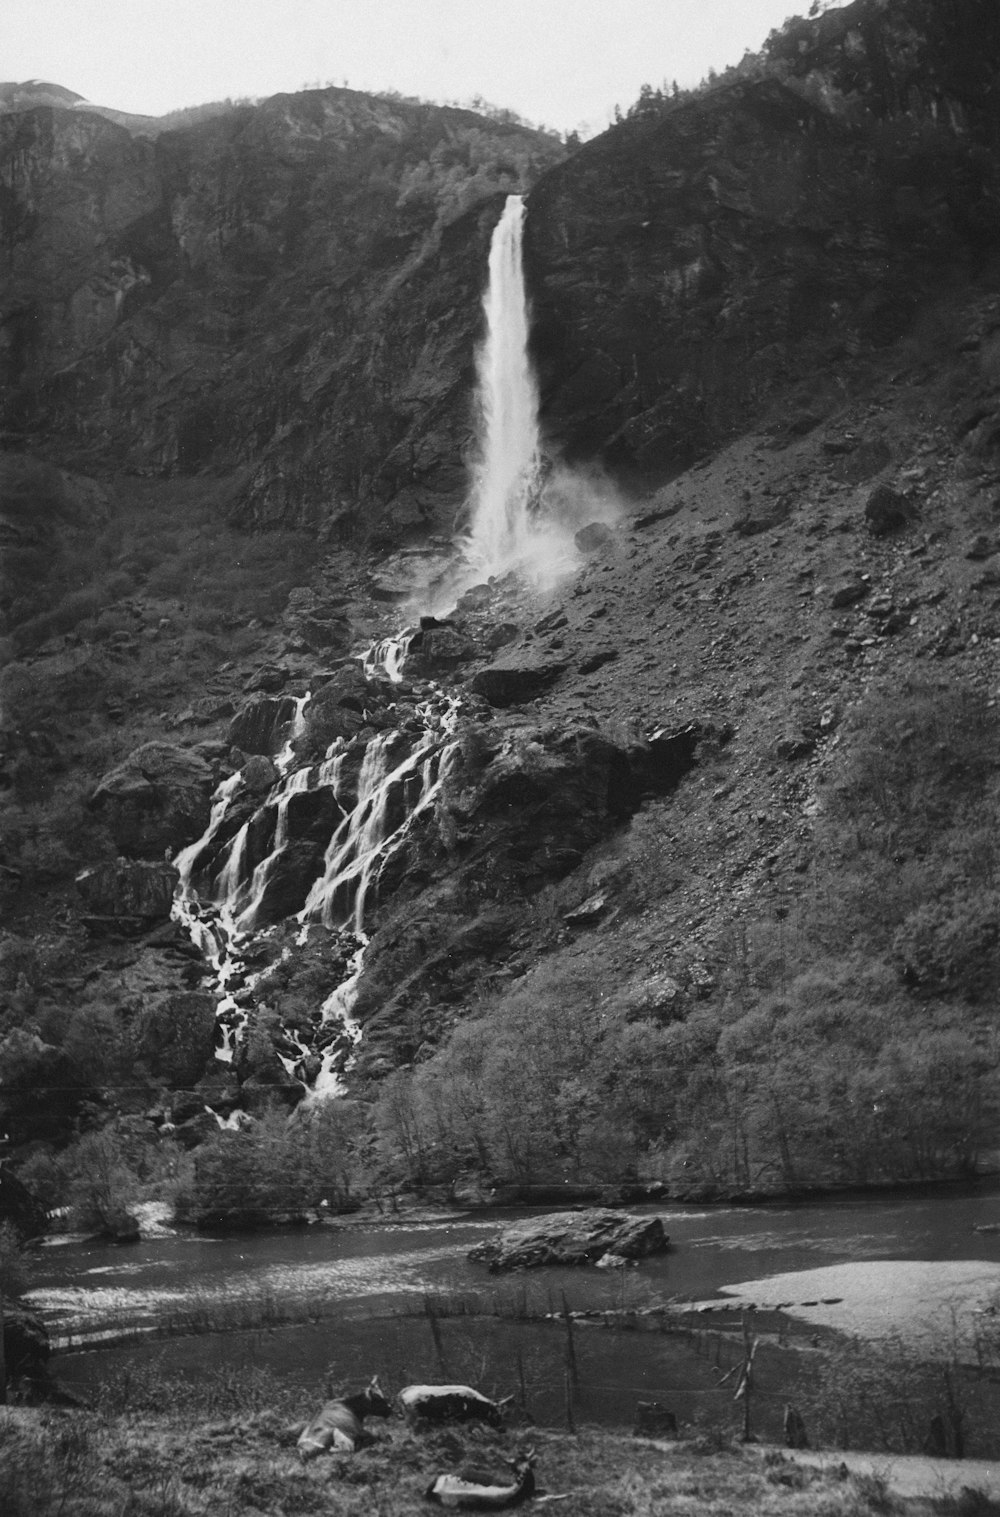 an old photo of a waterfall in the mountains